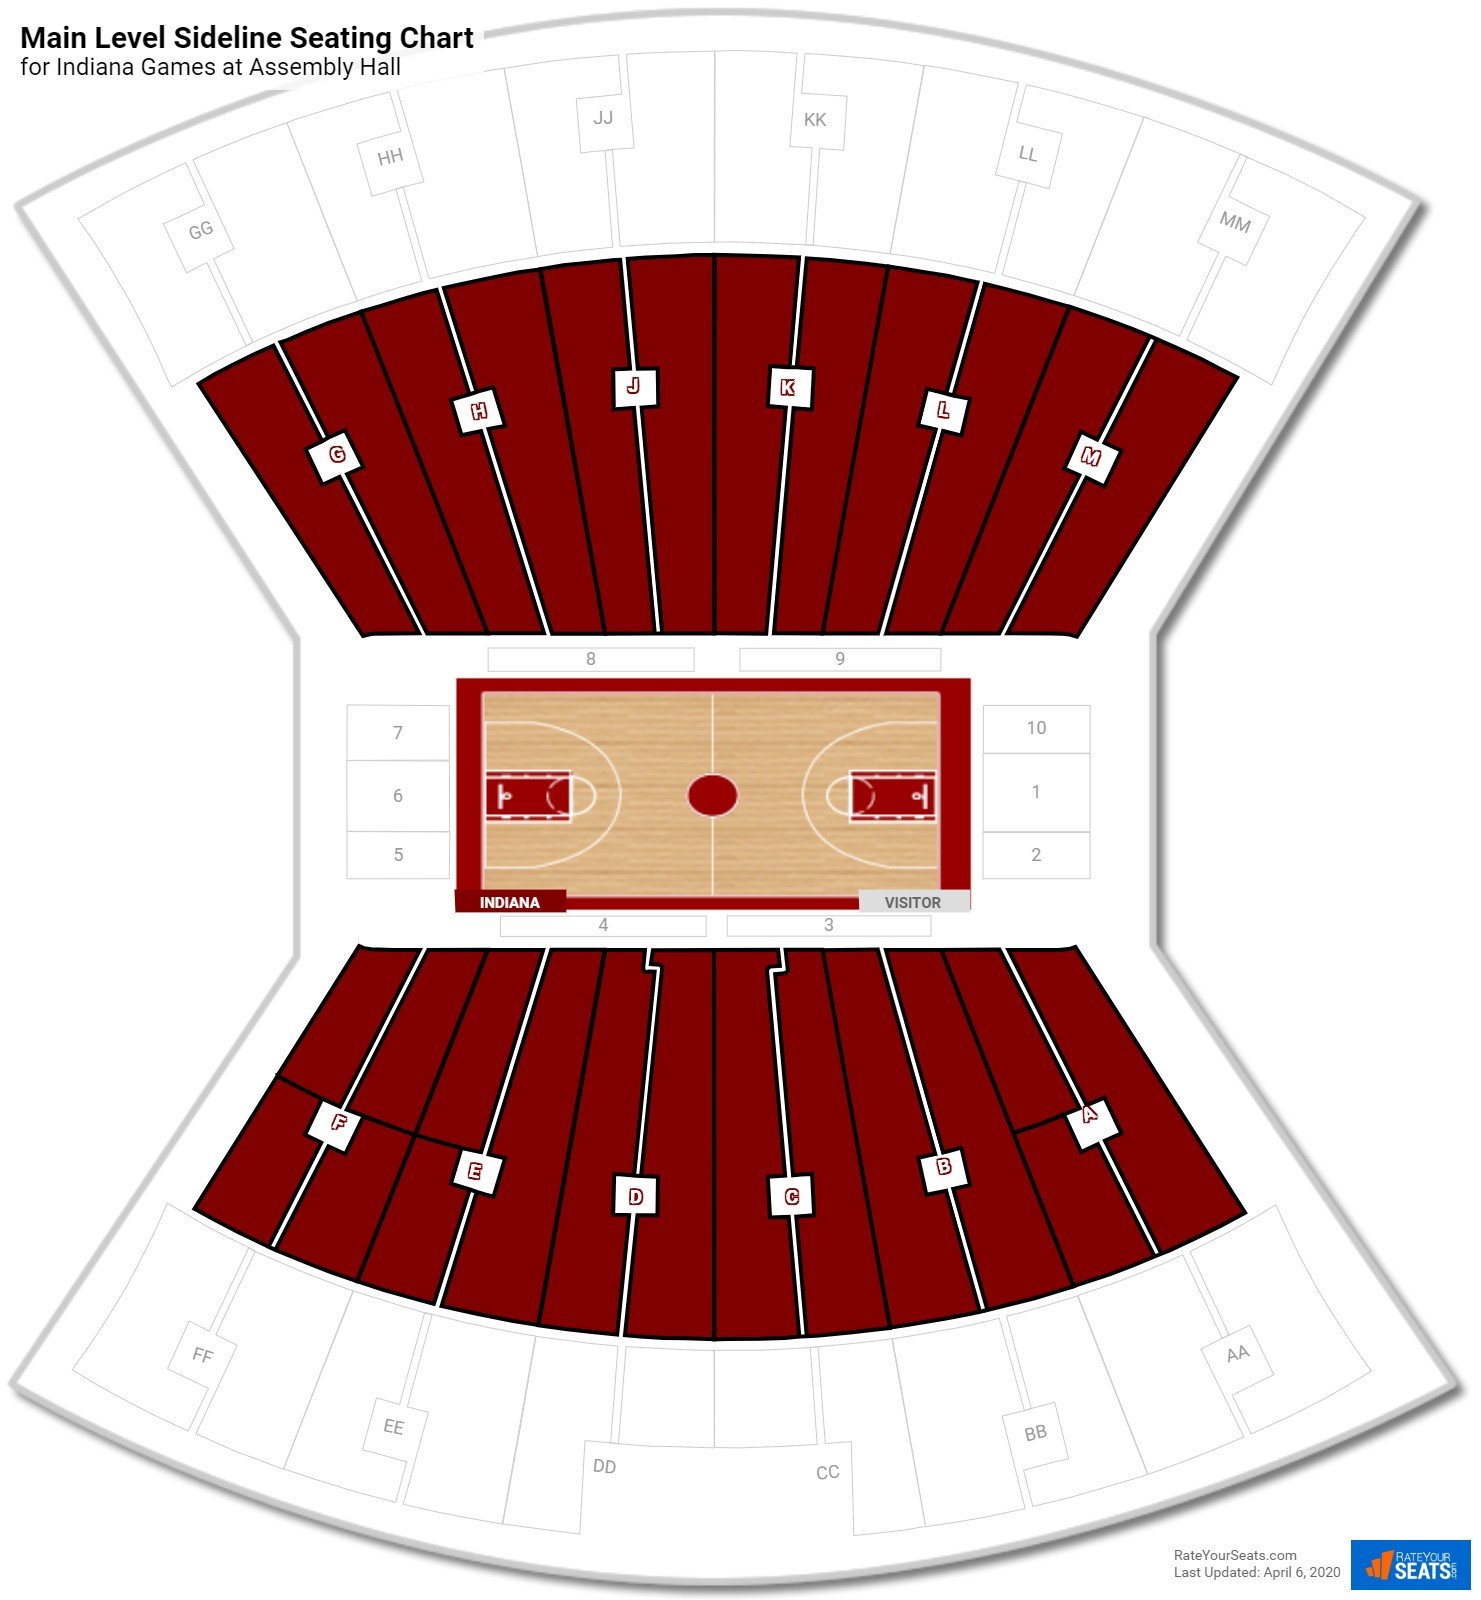 Assembly Hall (Indiana) Seating Guide - RateYourSeats.com